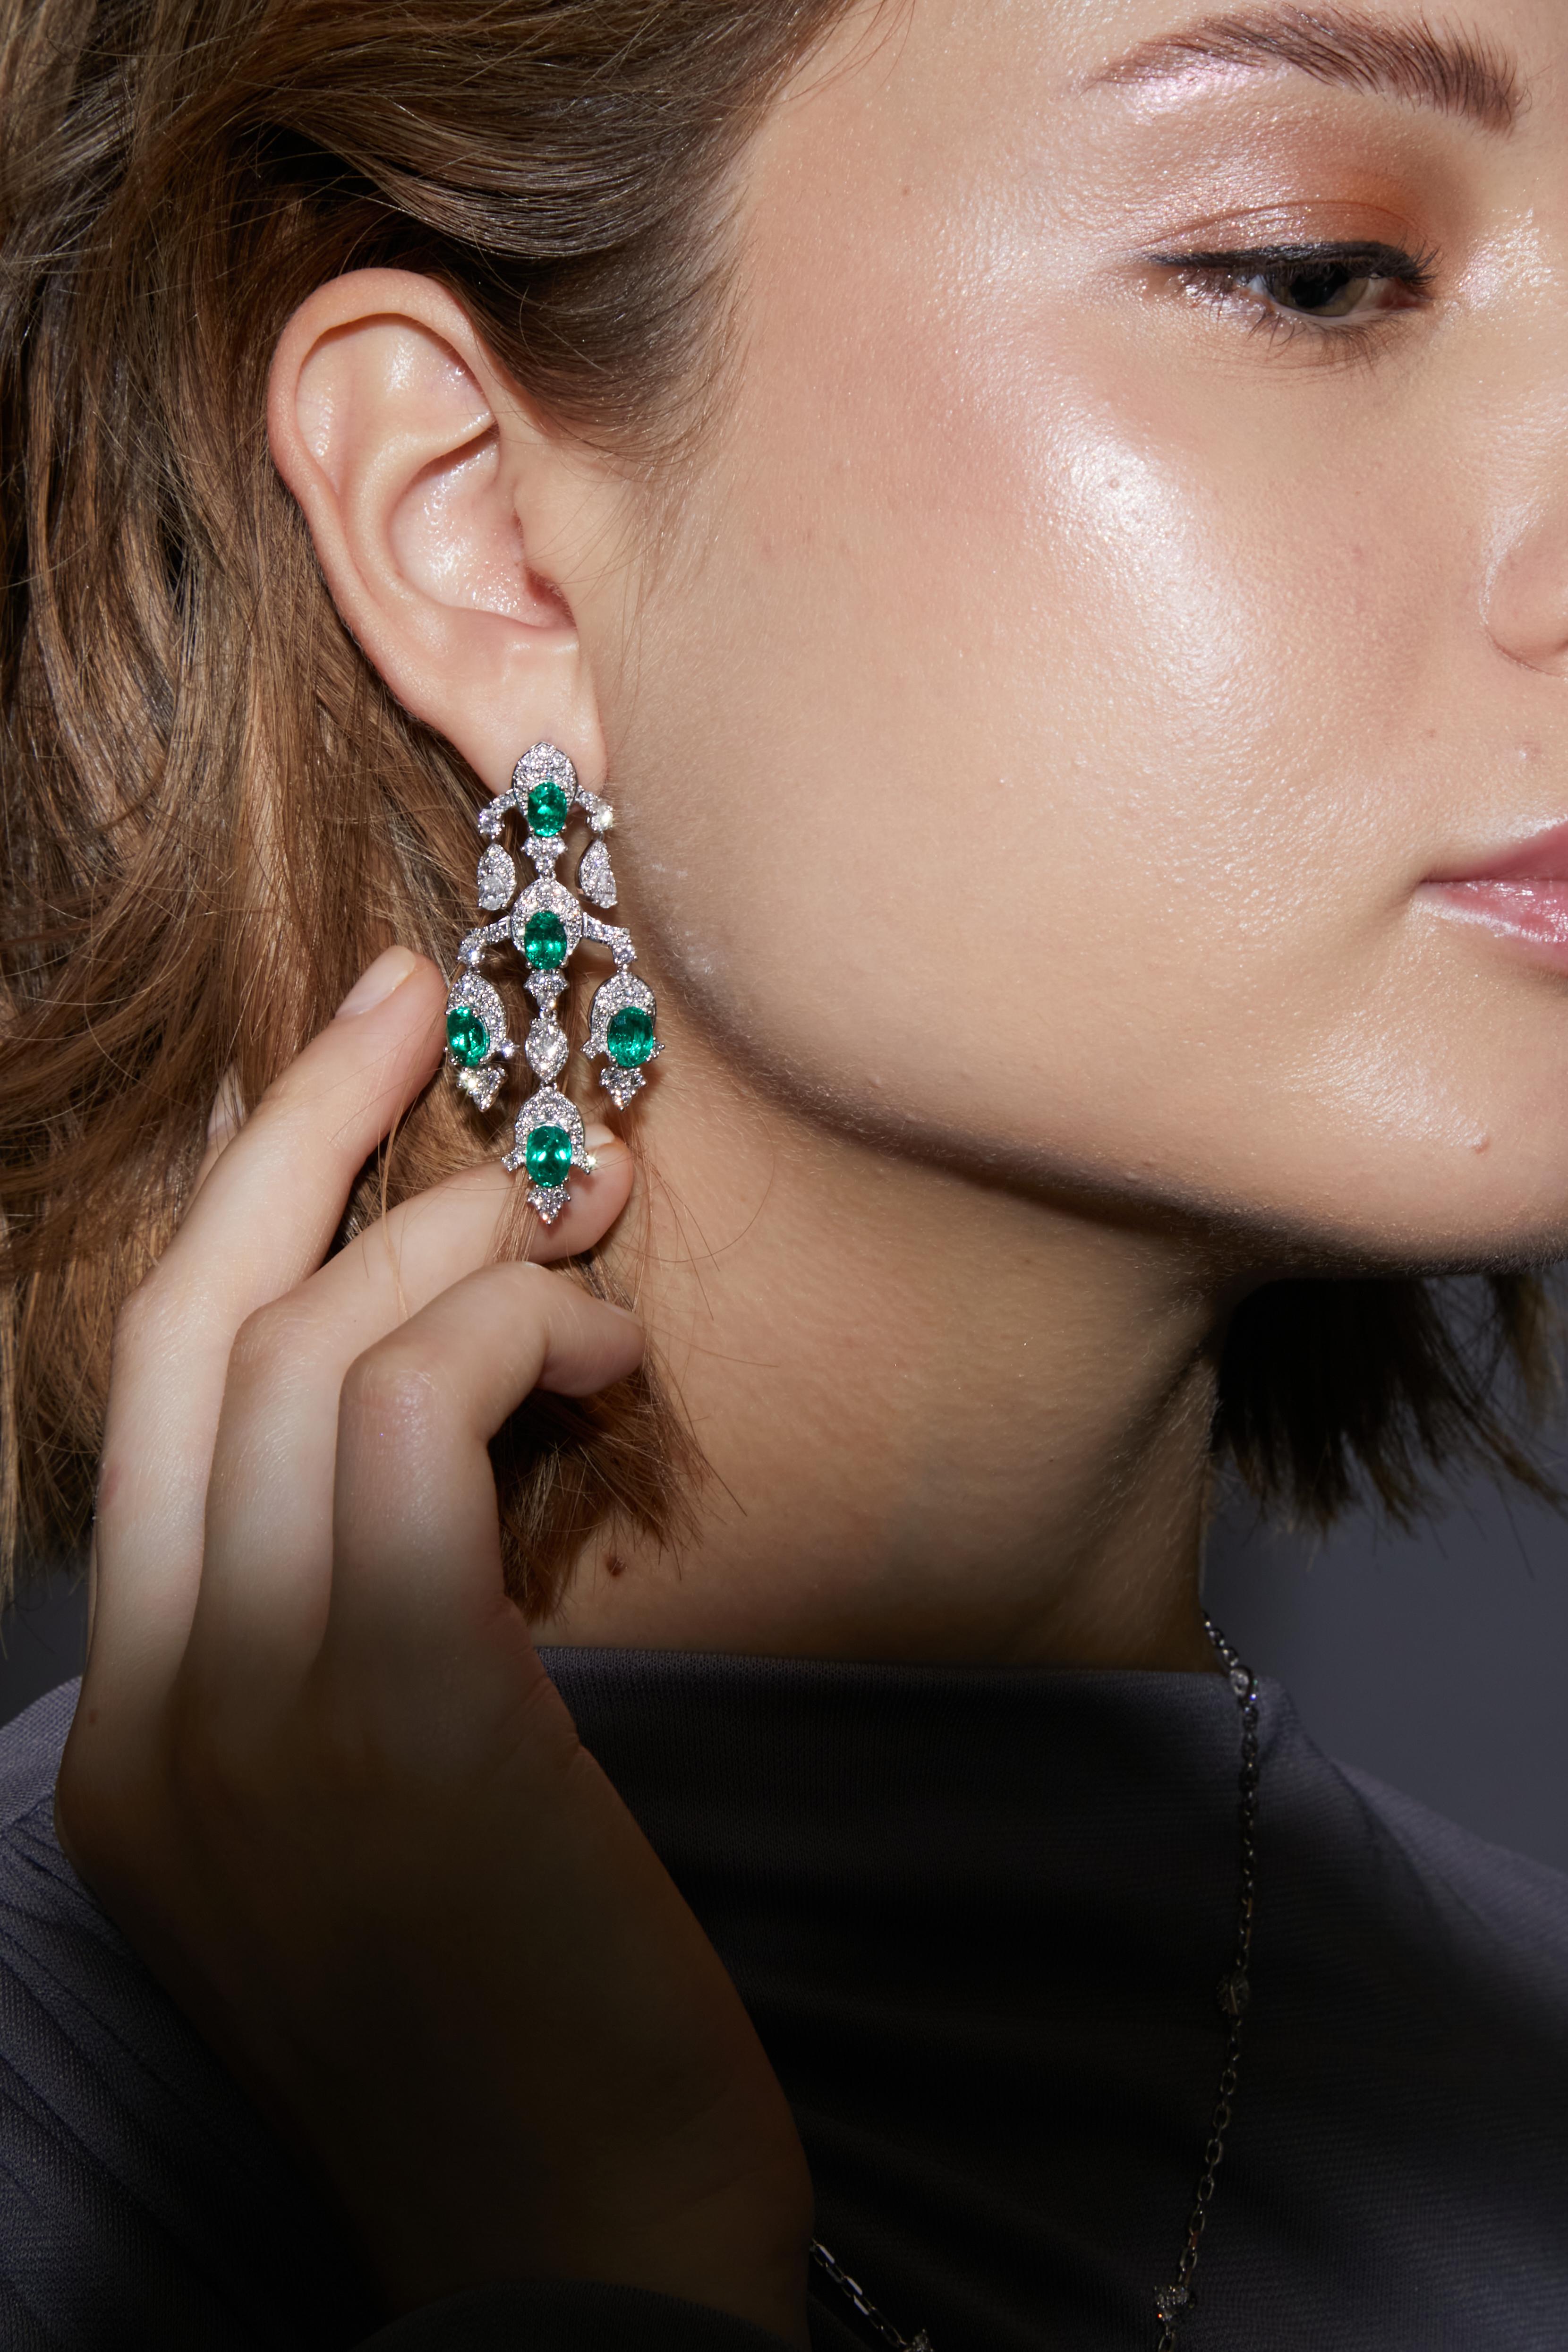 Regalia Earrings by Sunita Nahata Fine Design. A statement piece created using the finest Emeralds. Featuring subtle playful dangles these are a must have to glam up your evening look.

Contemporary Emerald Earrings in 18 Karat White Gold with